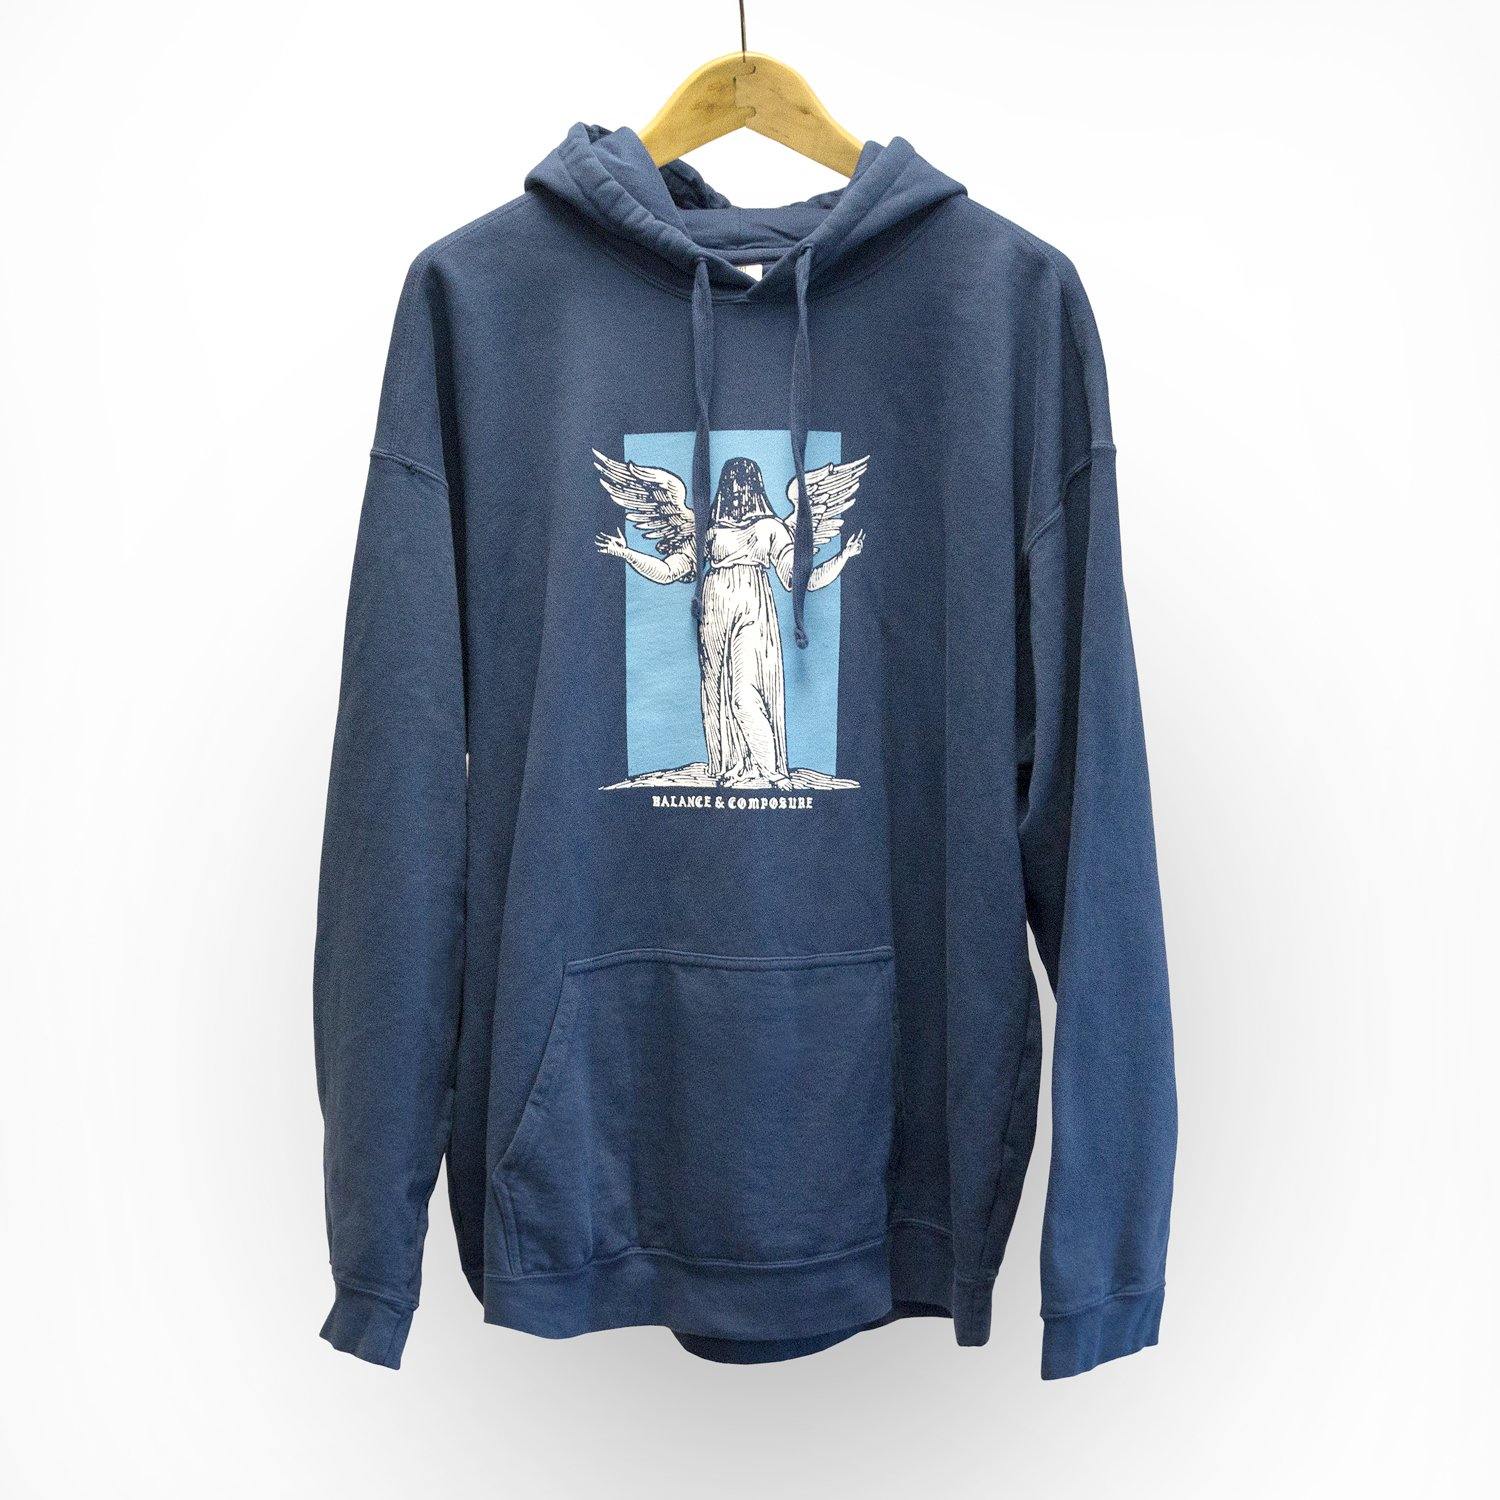 Buy – Balance and Composure "Angel" Hoodie – Band & Music Merch – Cold Cuts Merch